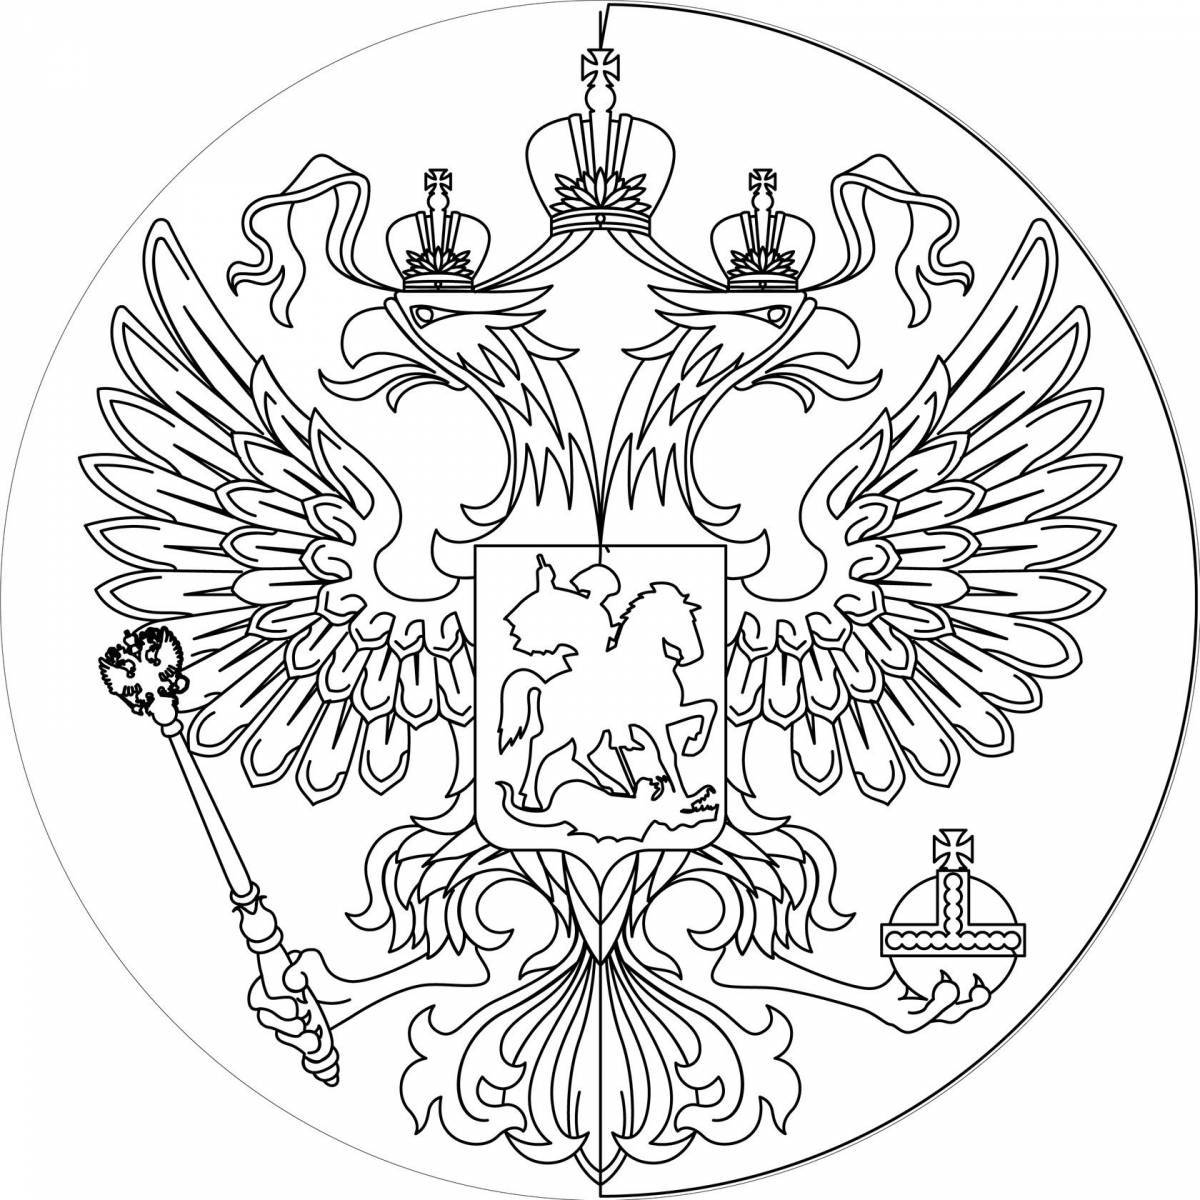 Coat of arms of Russia #16